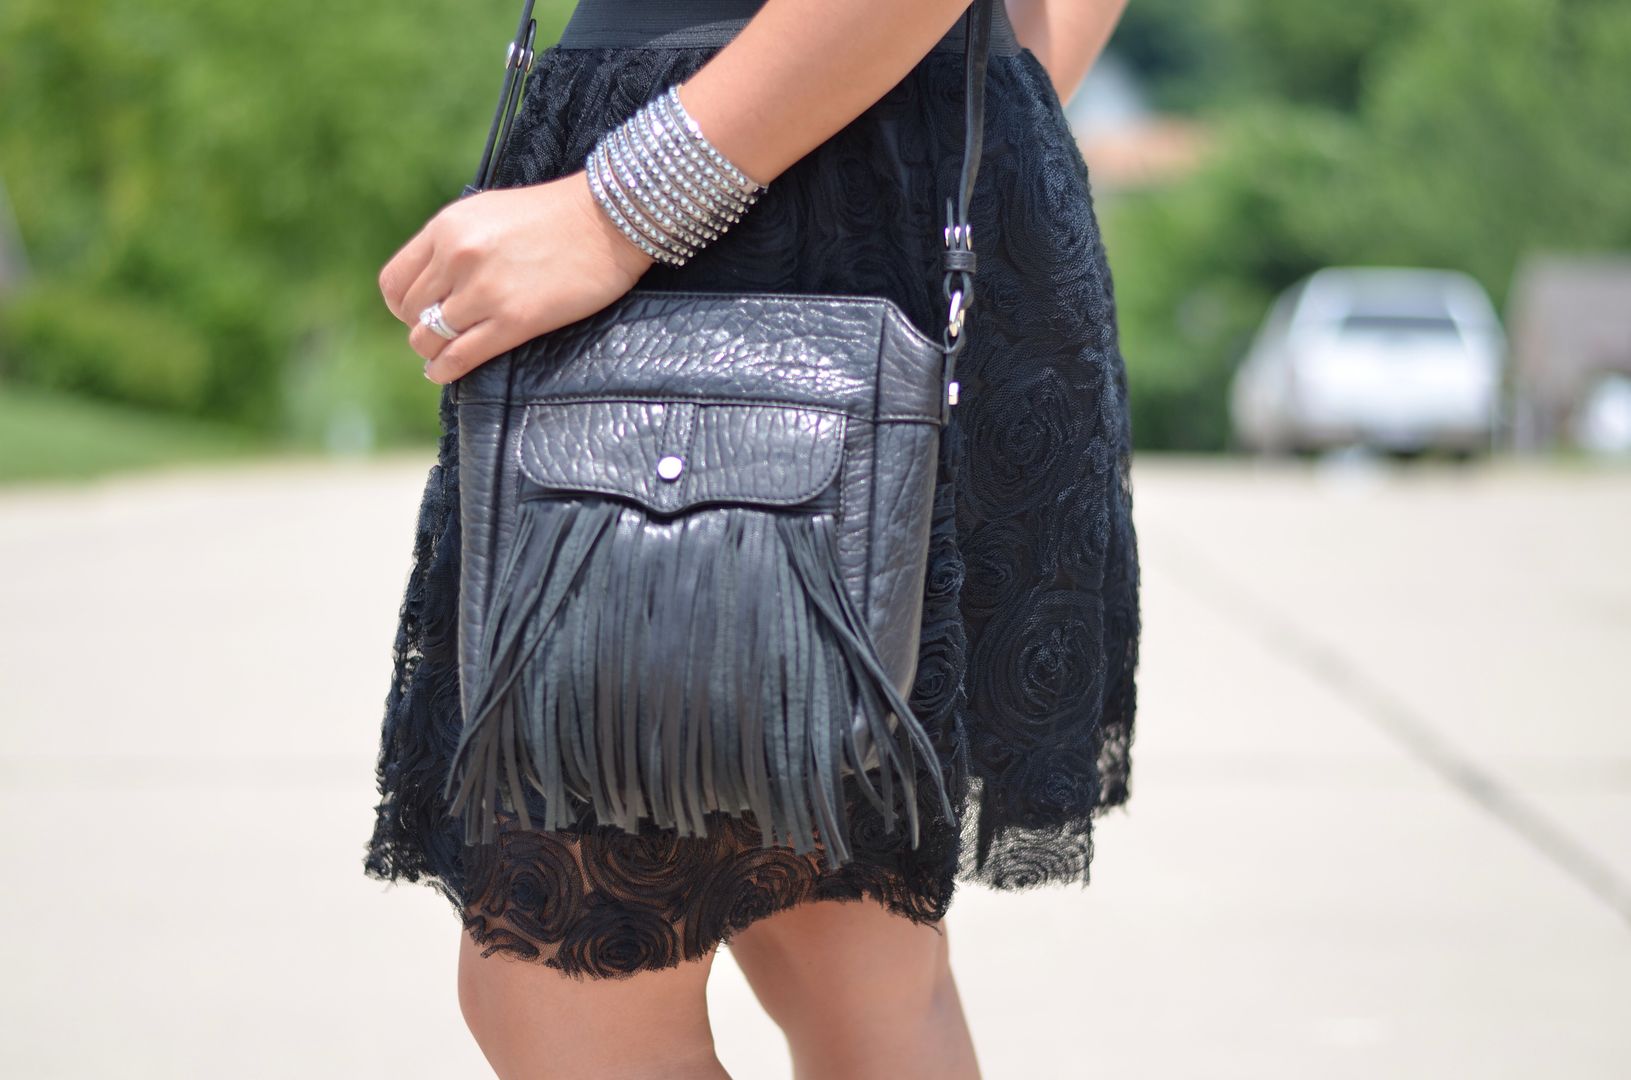 More Pieces of Me | St. Louis Fashion Blog: Tulle and fringe